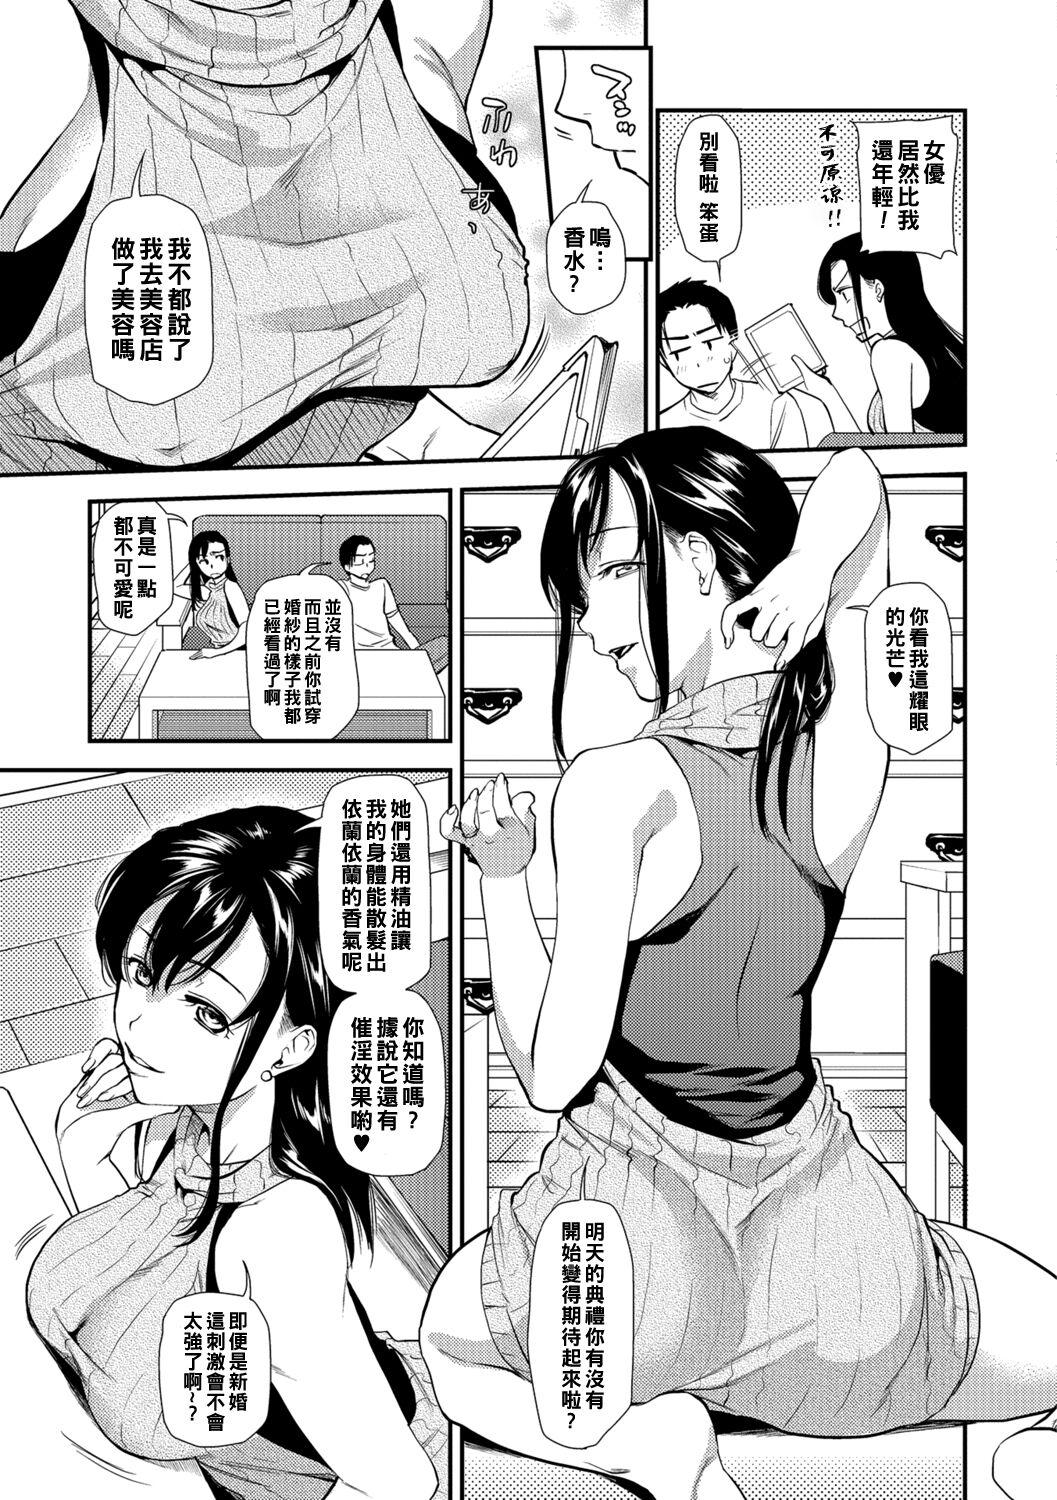 Jerking 新婚前夜（Chinese） With - Page 3